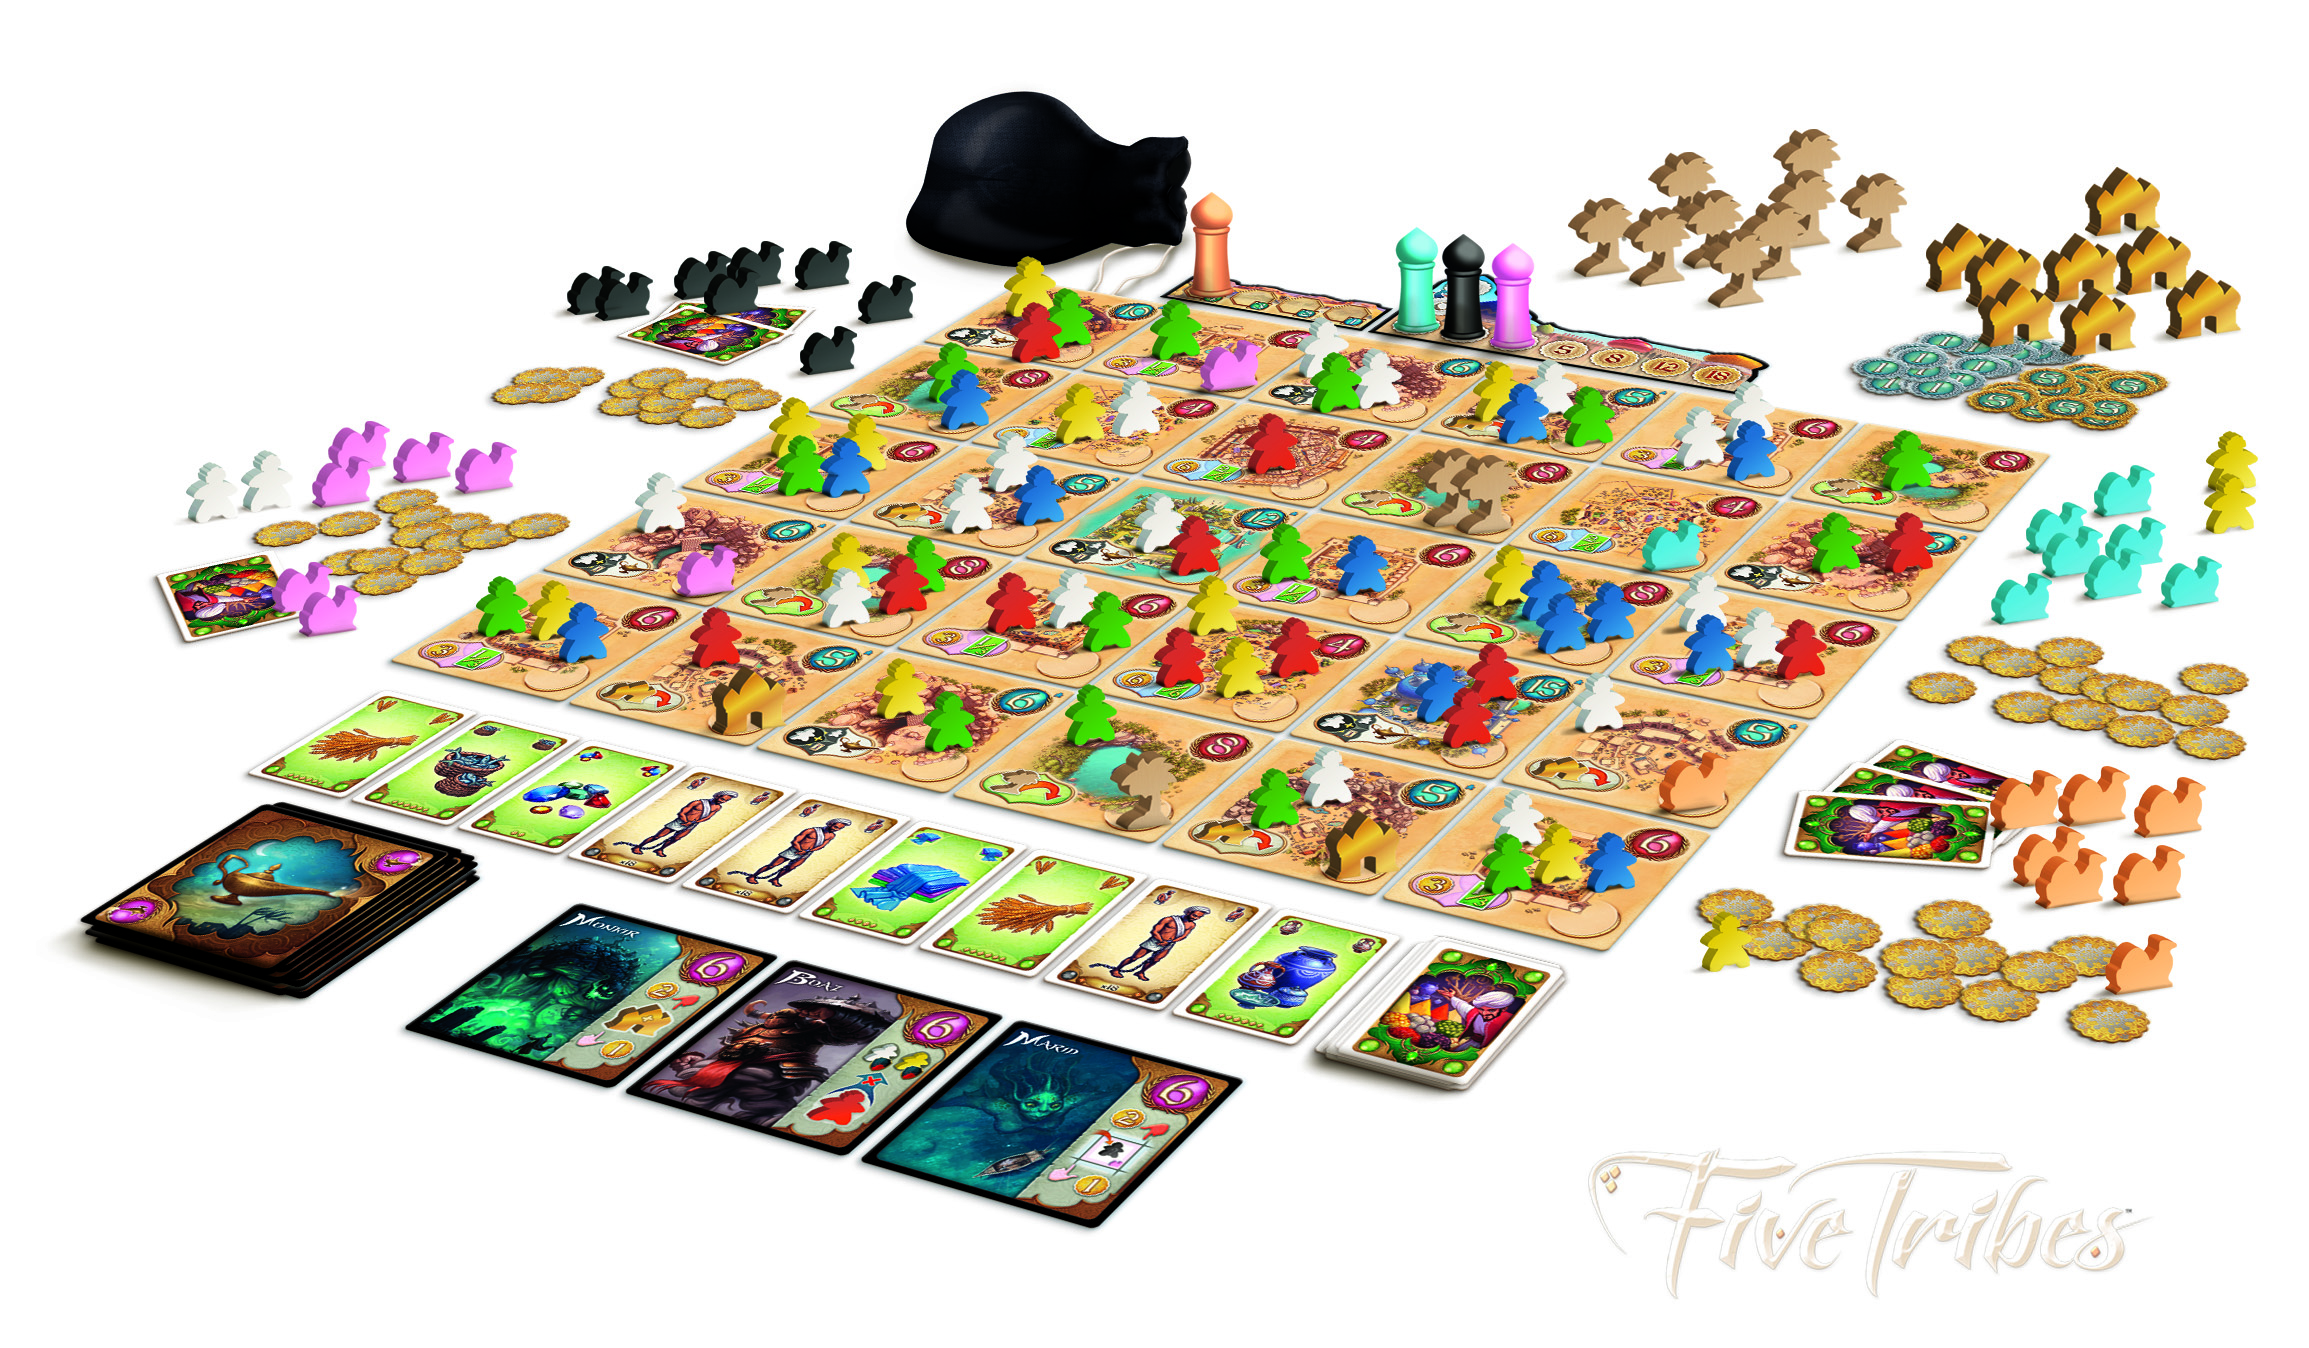 Five Tribes components